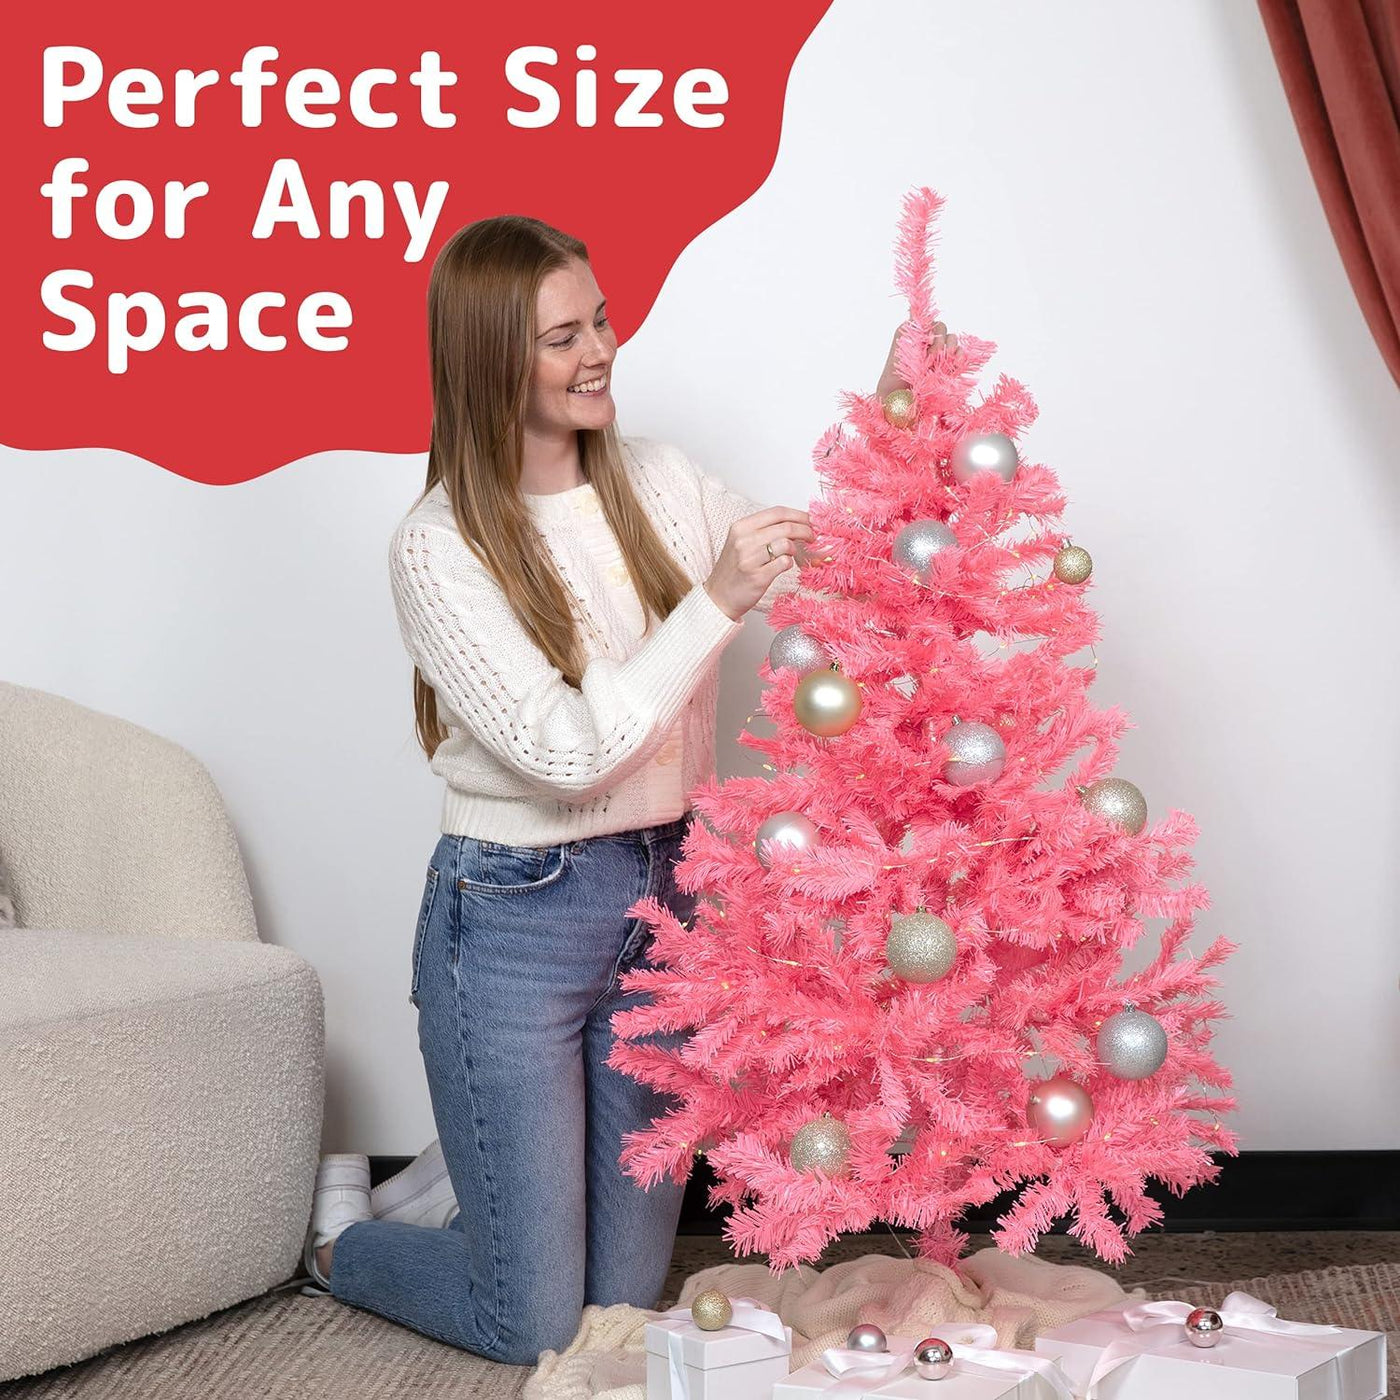 Small Christmas Tree Pink Artificial Canadian Fir - 1.2M (320 Tips) - Massive Discounts